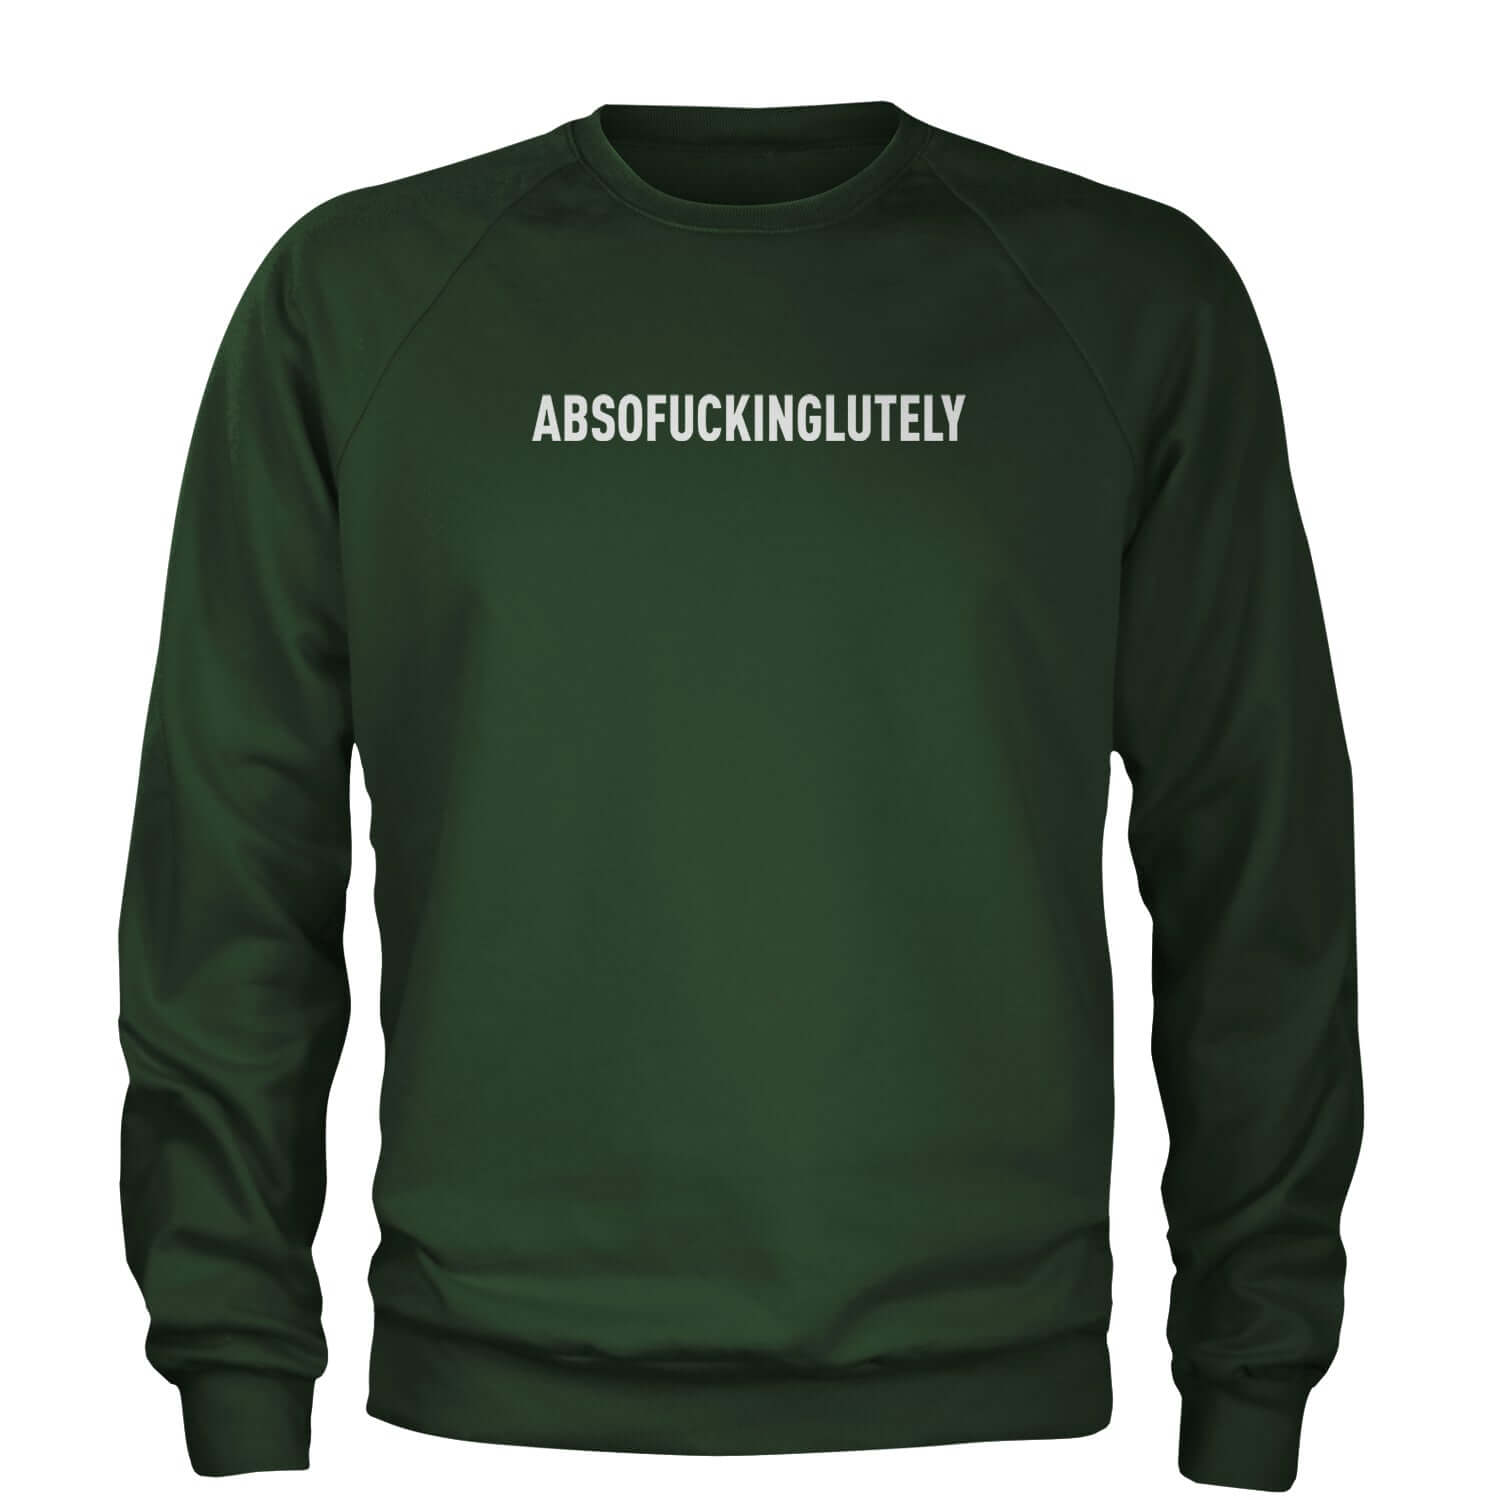 Abso f-cking lutely Adult Crewneck Sweatshirt funny, shirt by Expression Tees